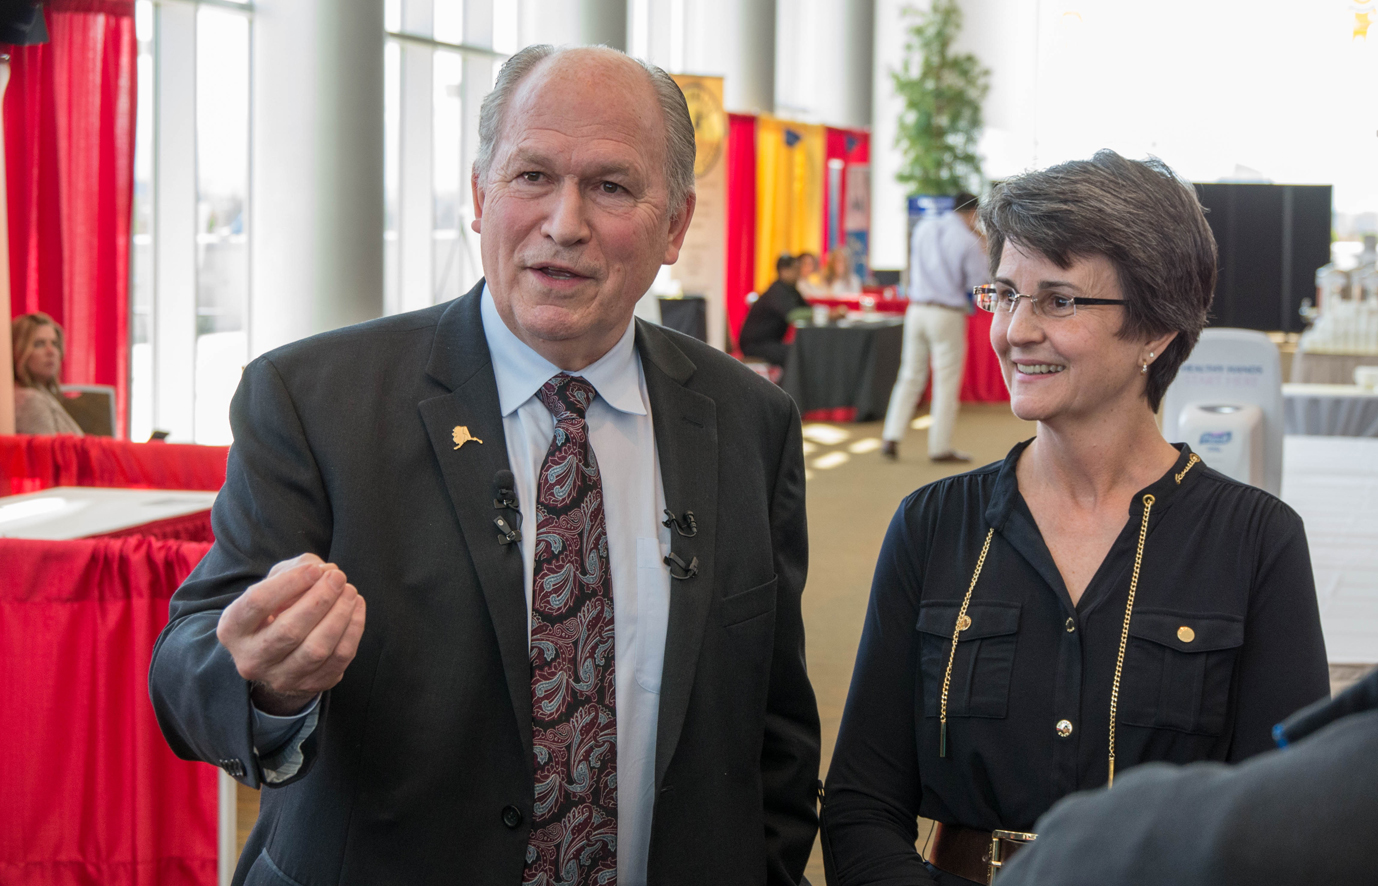 Gov. Bill Walker and Susan Carney talk to the press after making the announcement Thursday.